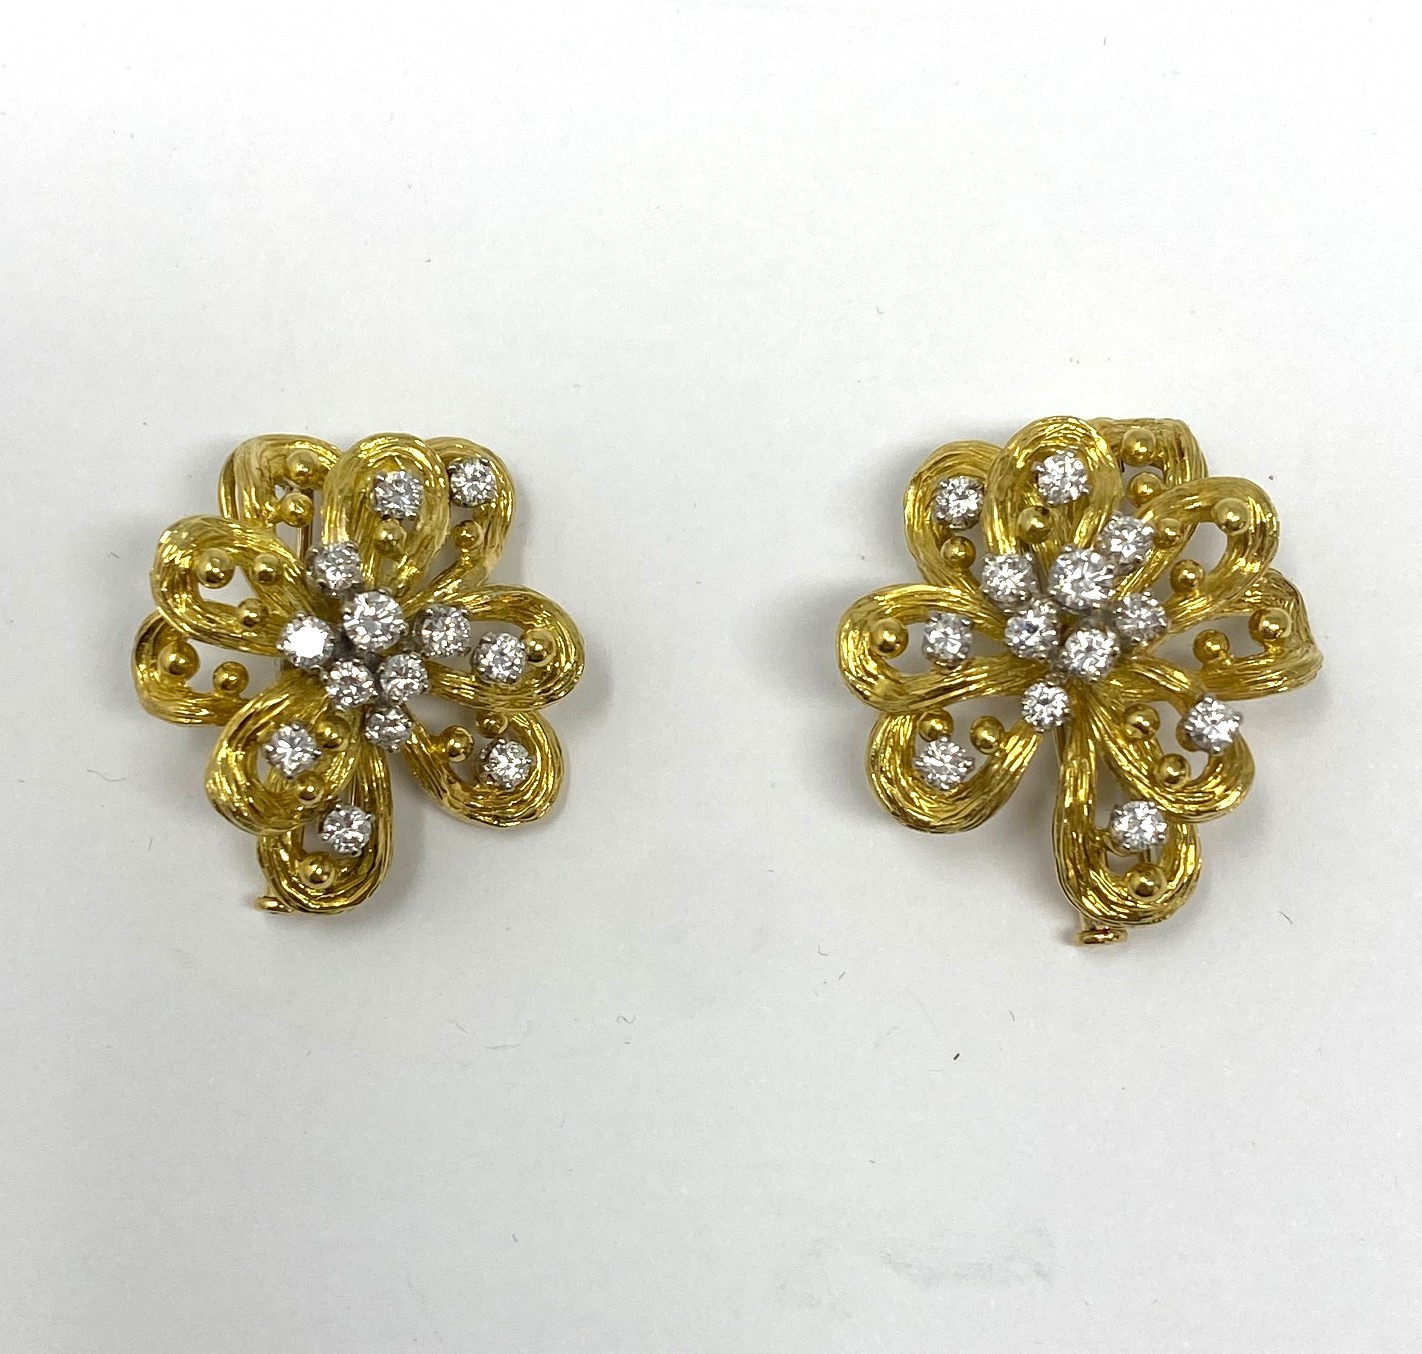 PAIR OF DIAMOND BROOCH CLIPS, 1960s - Image 2 of 3